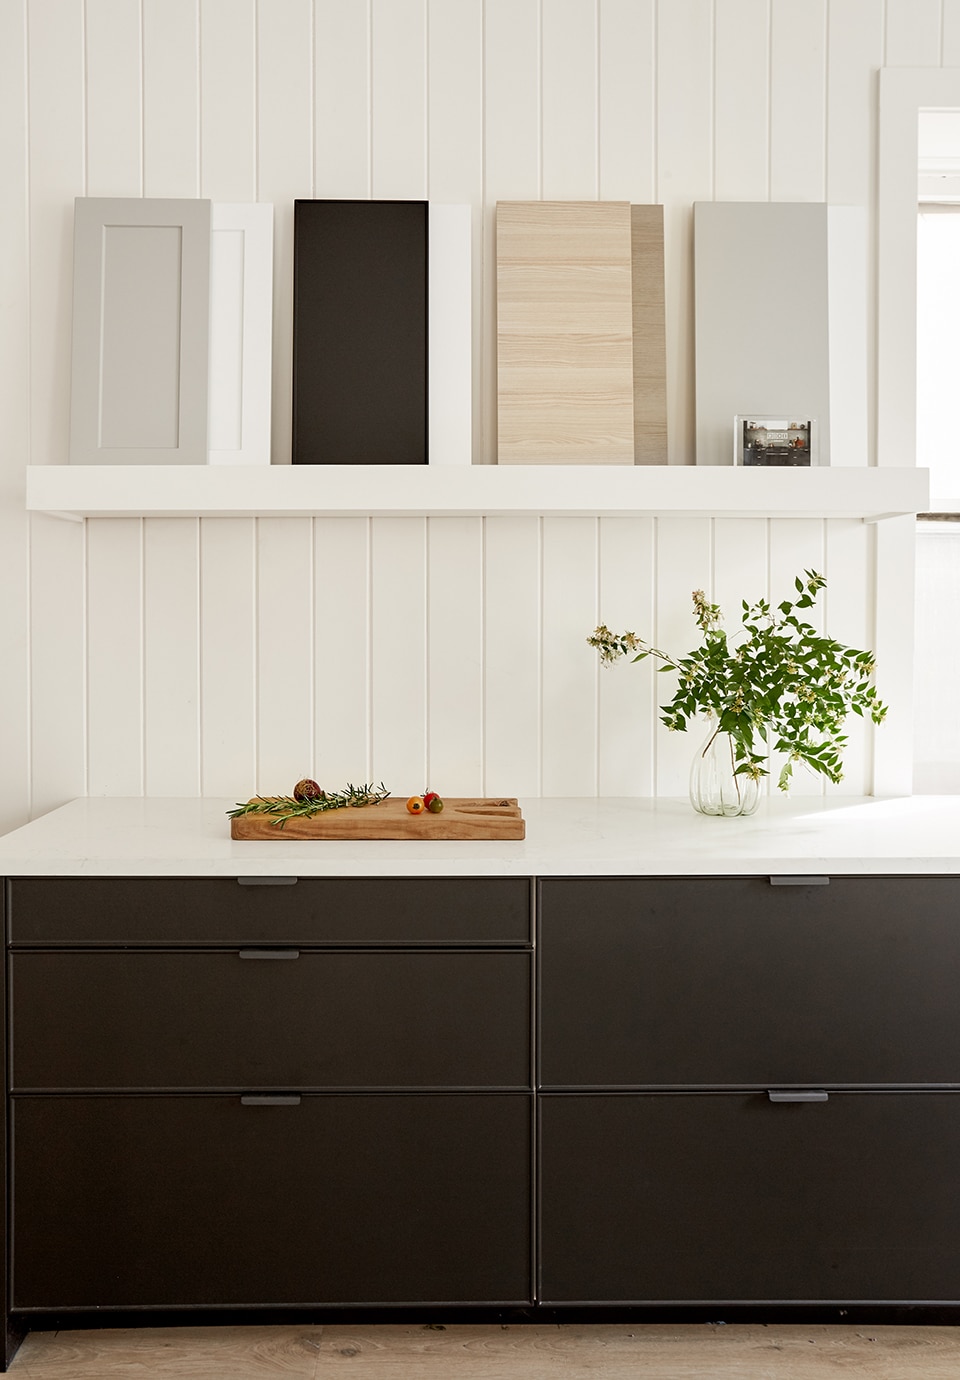 Matte Black Is Taking Over Kitchens Everywhere  Matte black kitchen, Black  kitchen cabinets, Black kitchens